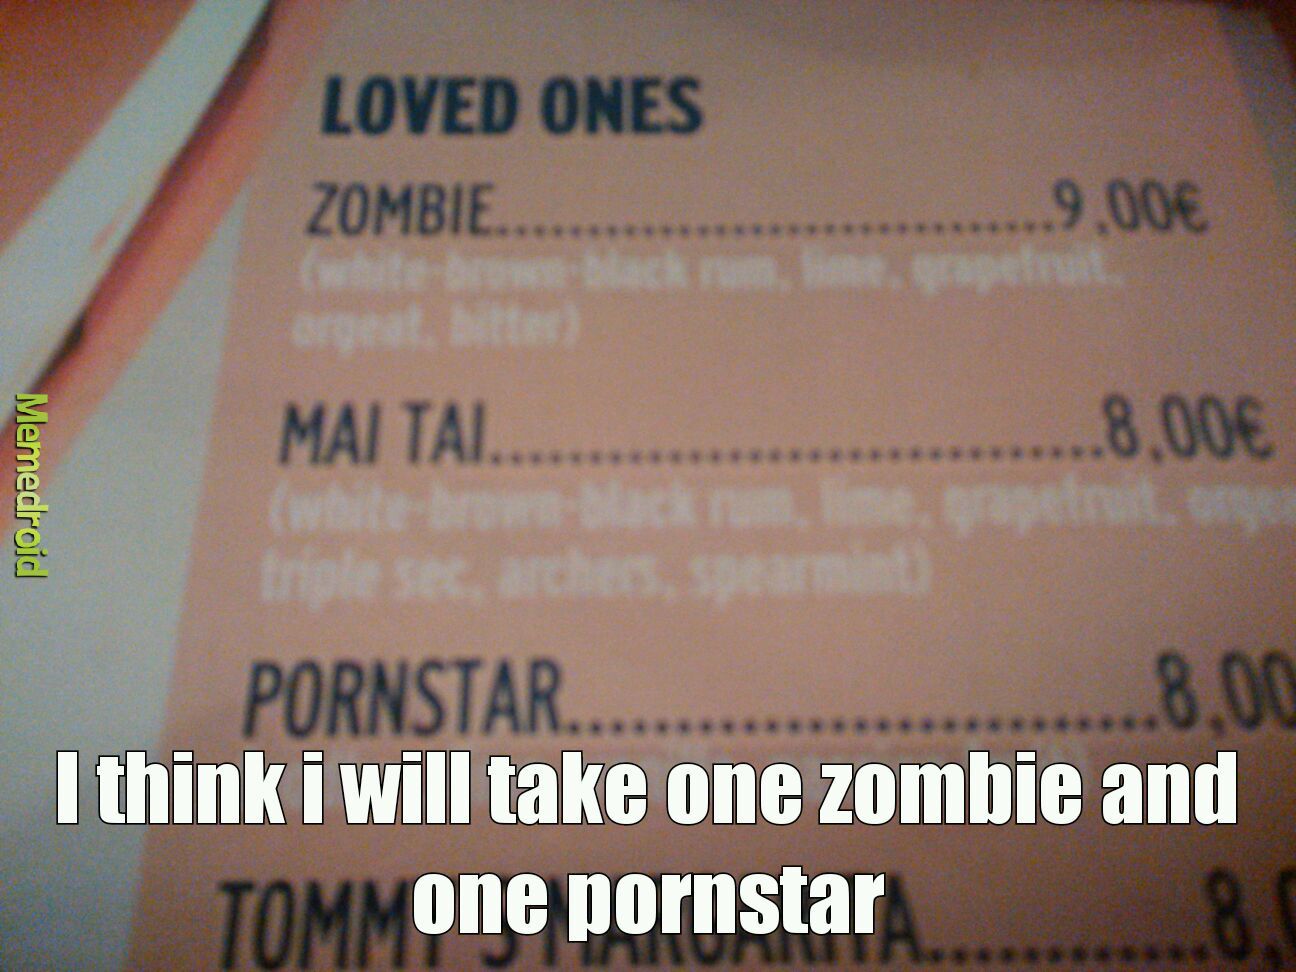 Omg they sell zombies - meme